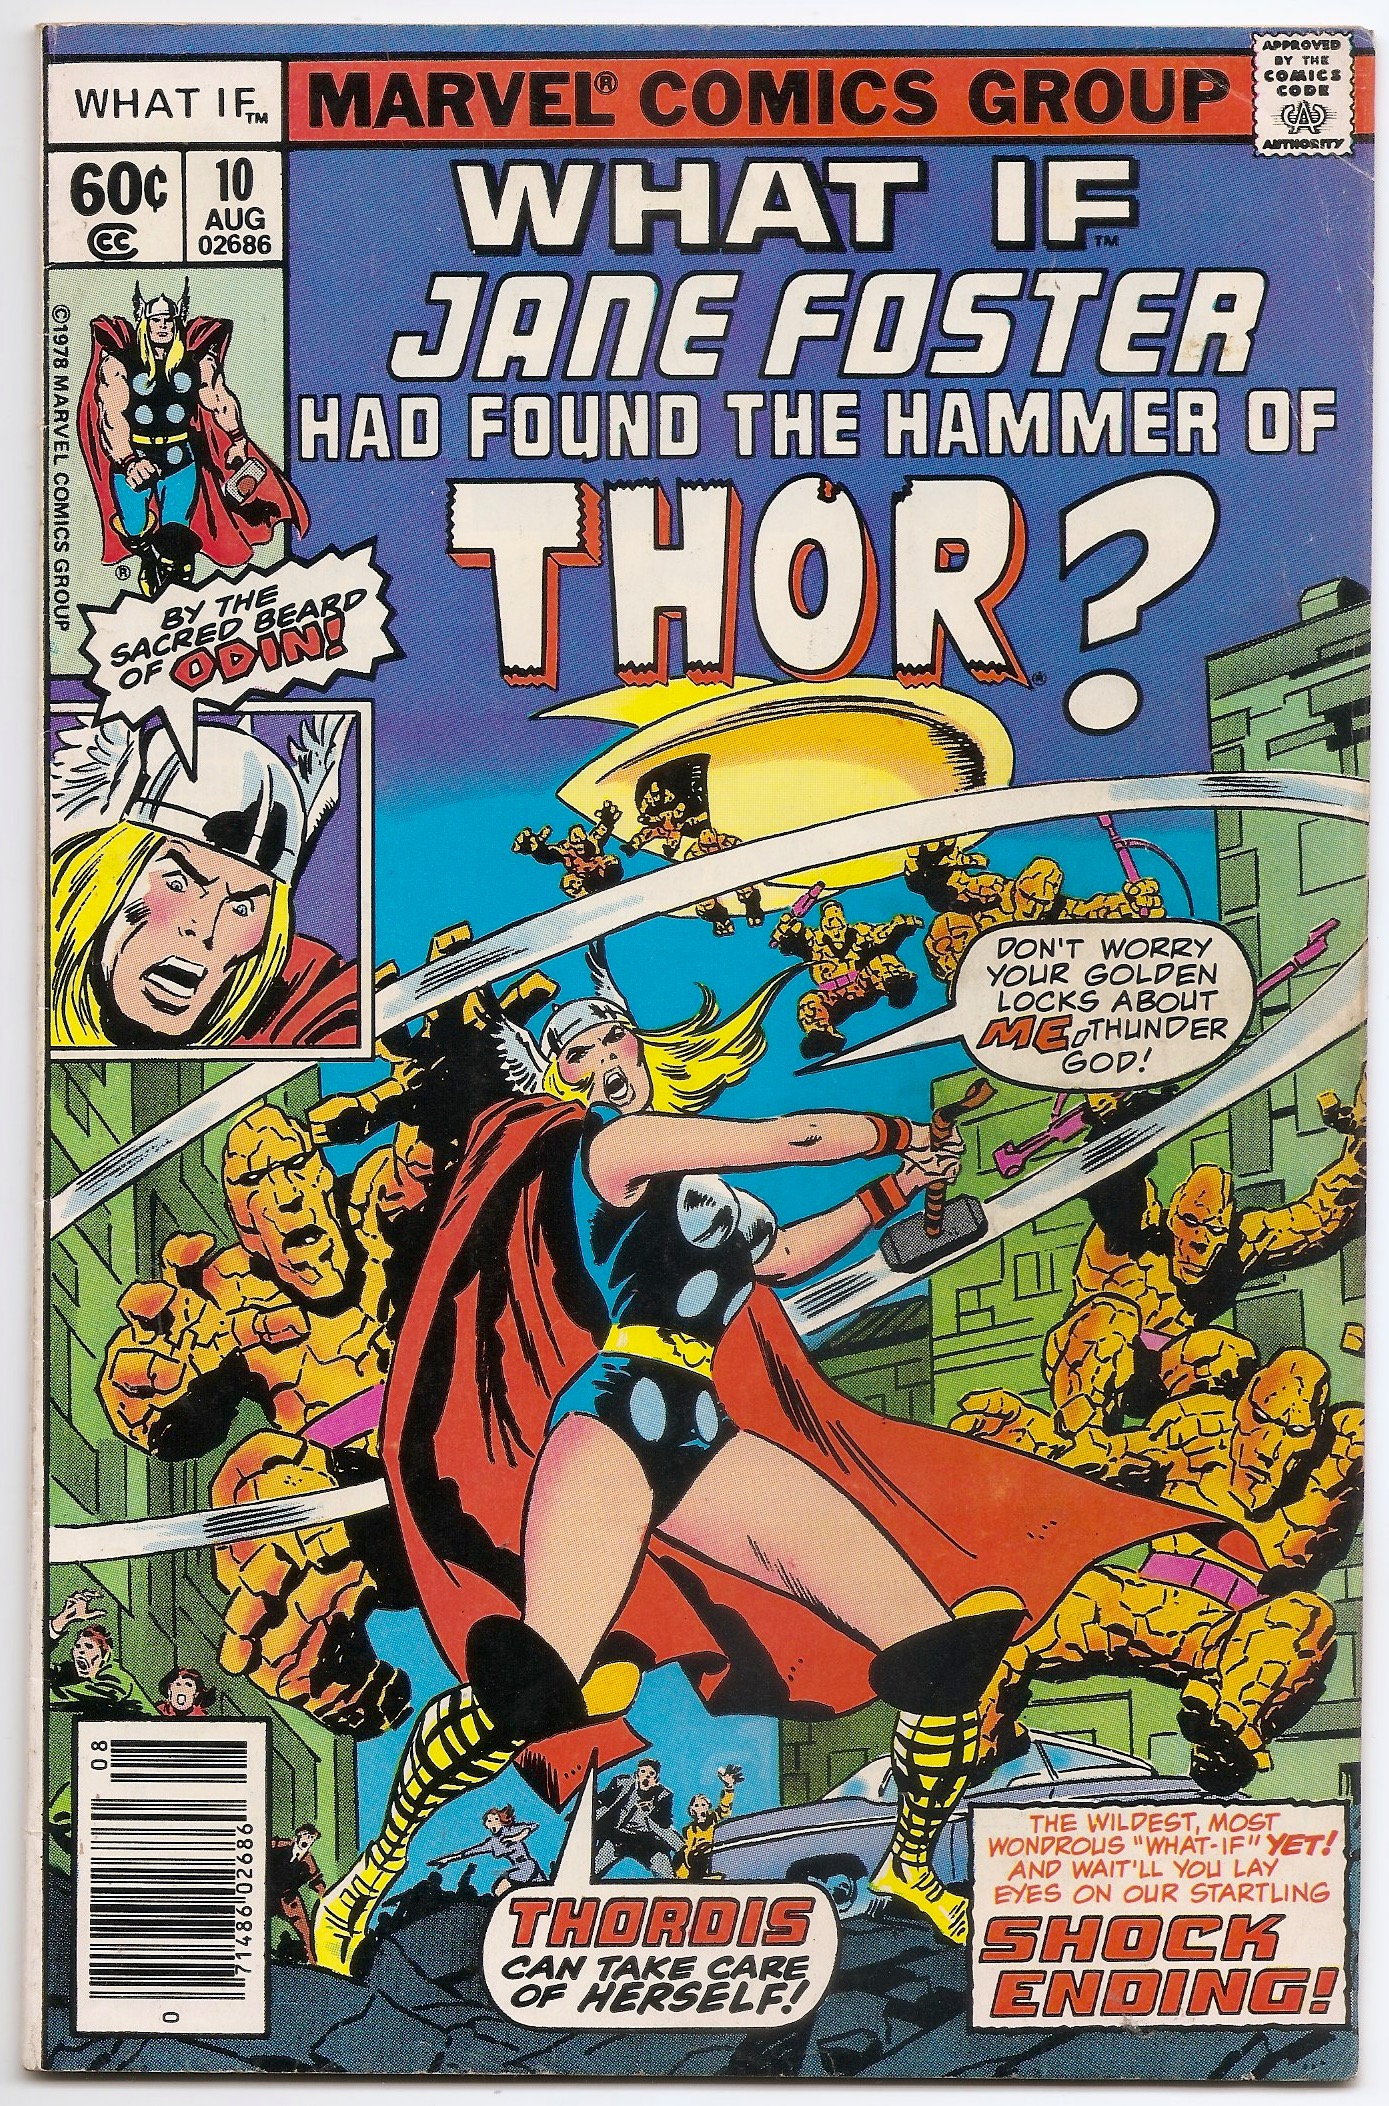 THOR #1 NYCC Exclusive Arthur Adams 2014 Variant 1st Appearance Jane Foster